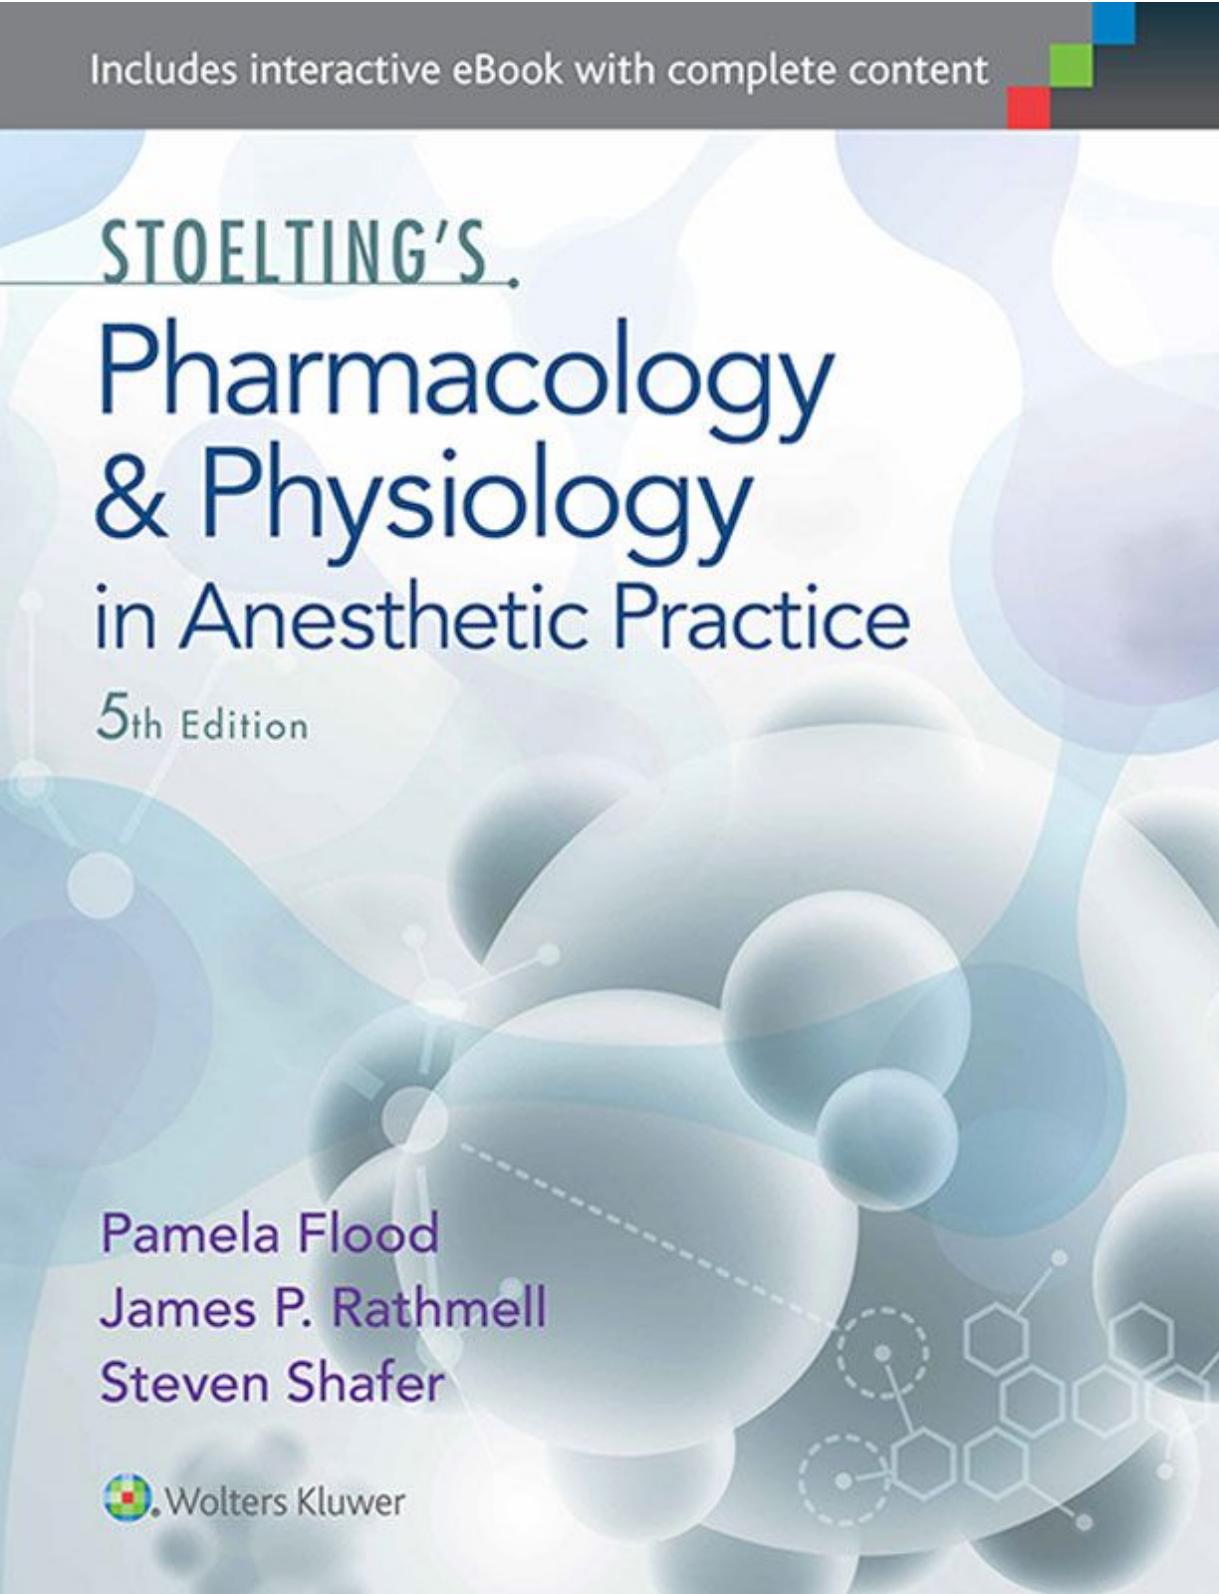 Stoelting’s Pharmacology & Physiology in Anesthetic Practice 2015